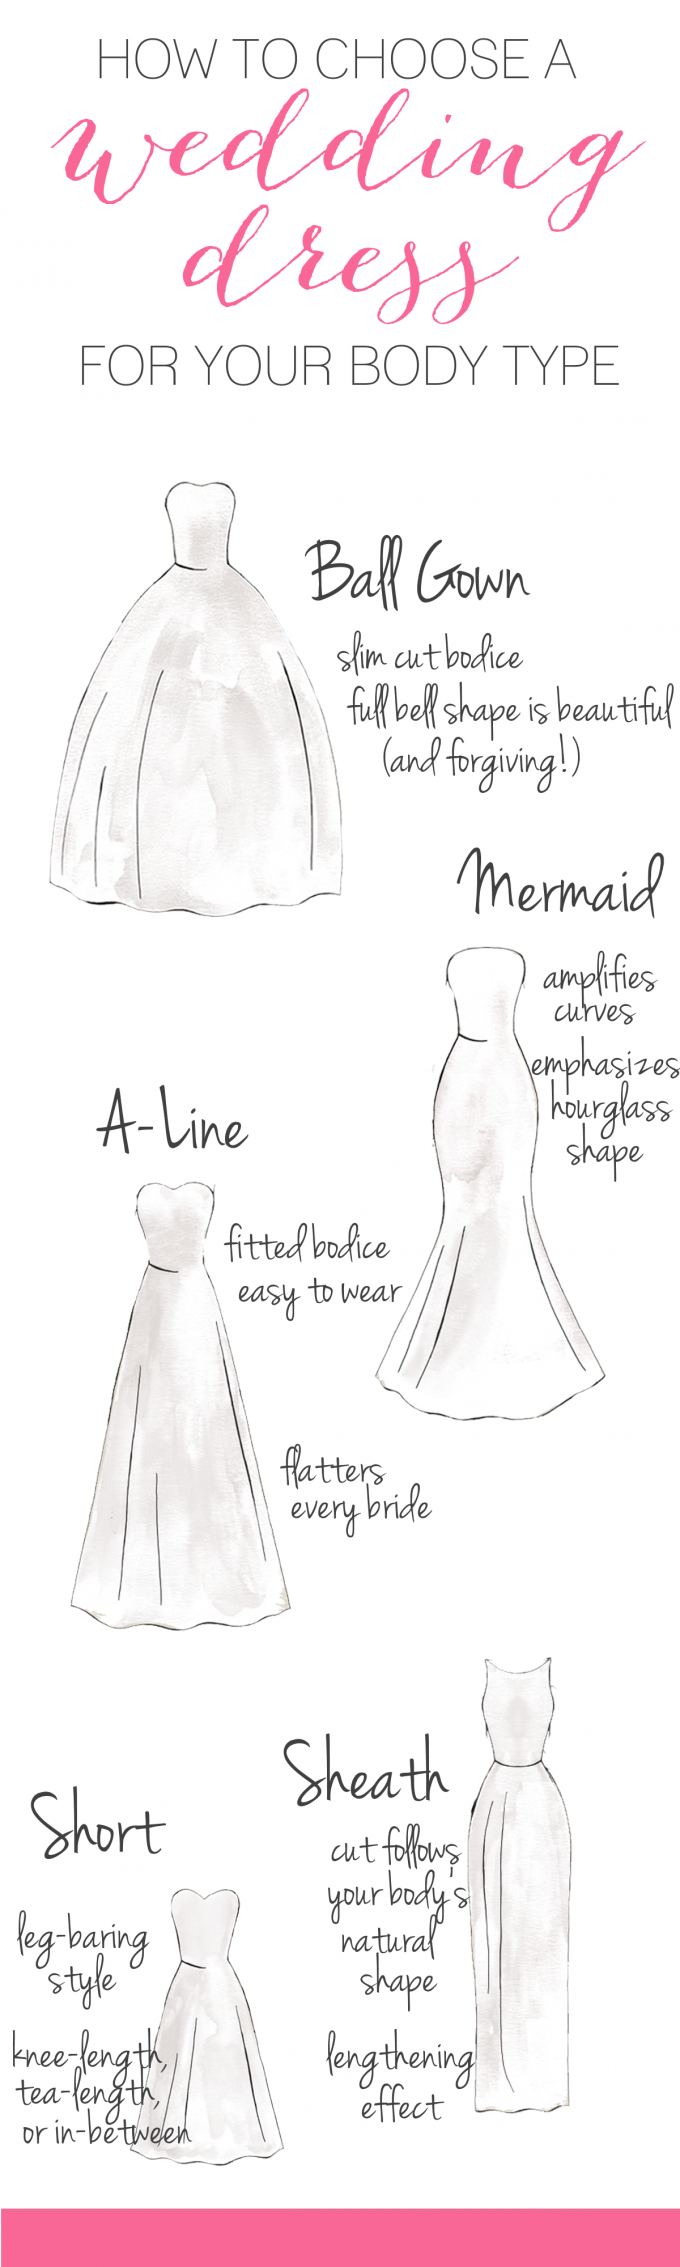 How to Choose a Wedding Dress for Your Body Type